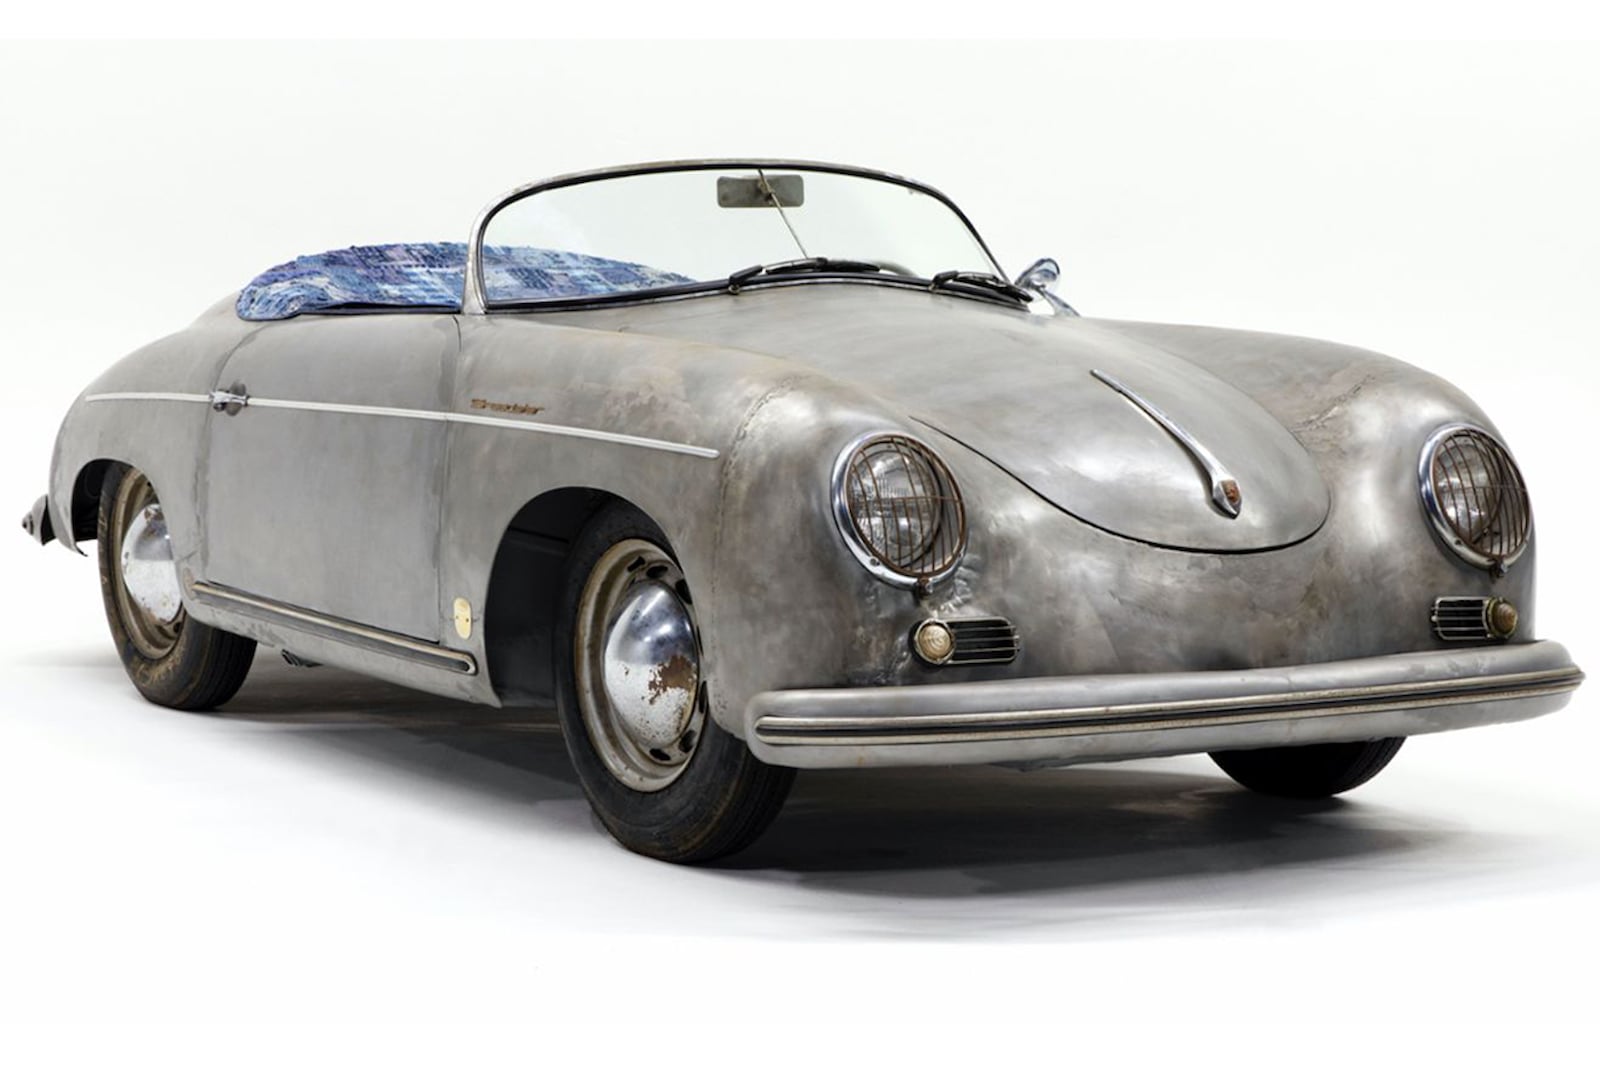 Ratty-Looking Porsche 356 Speedster Is Actually A Perfectly Restored Art  Car | CarBuzz